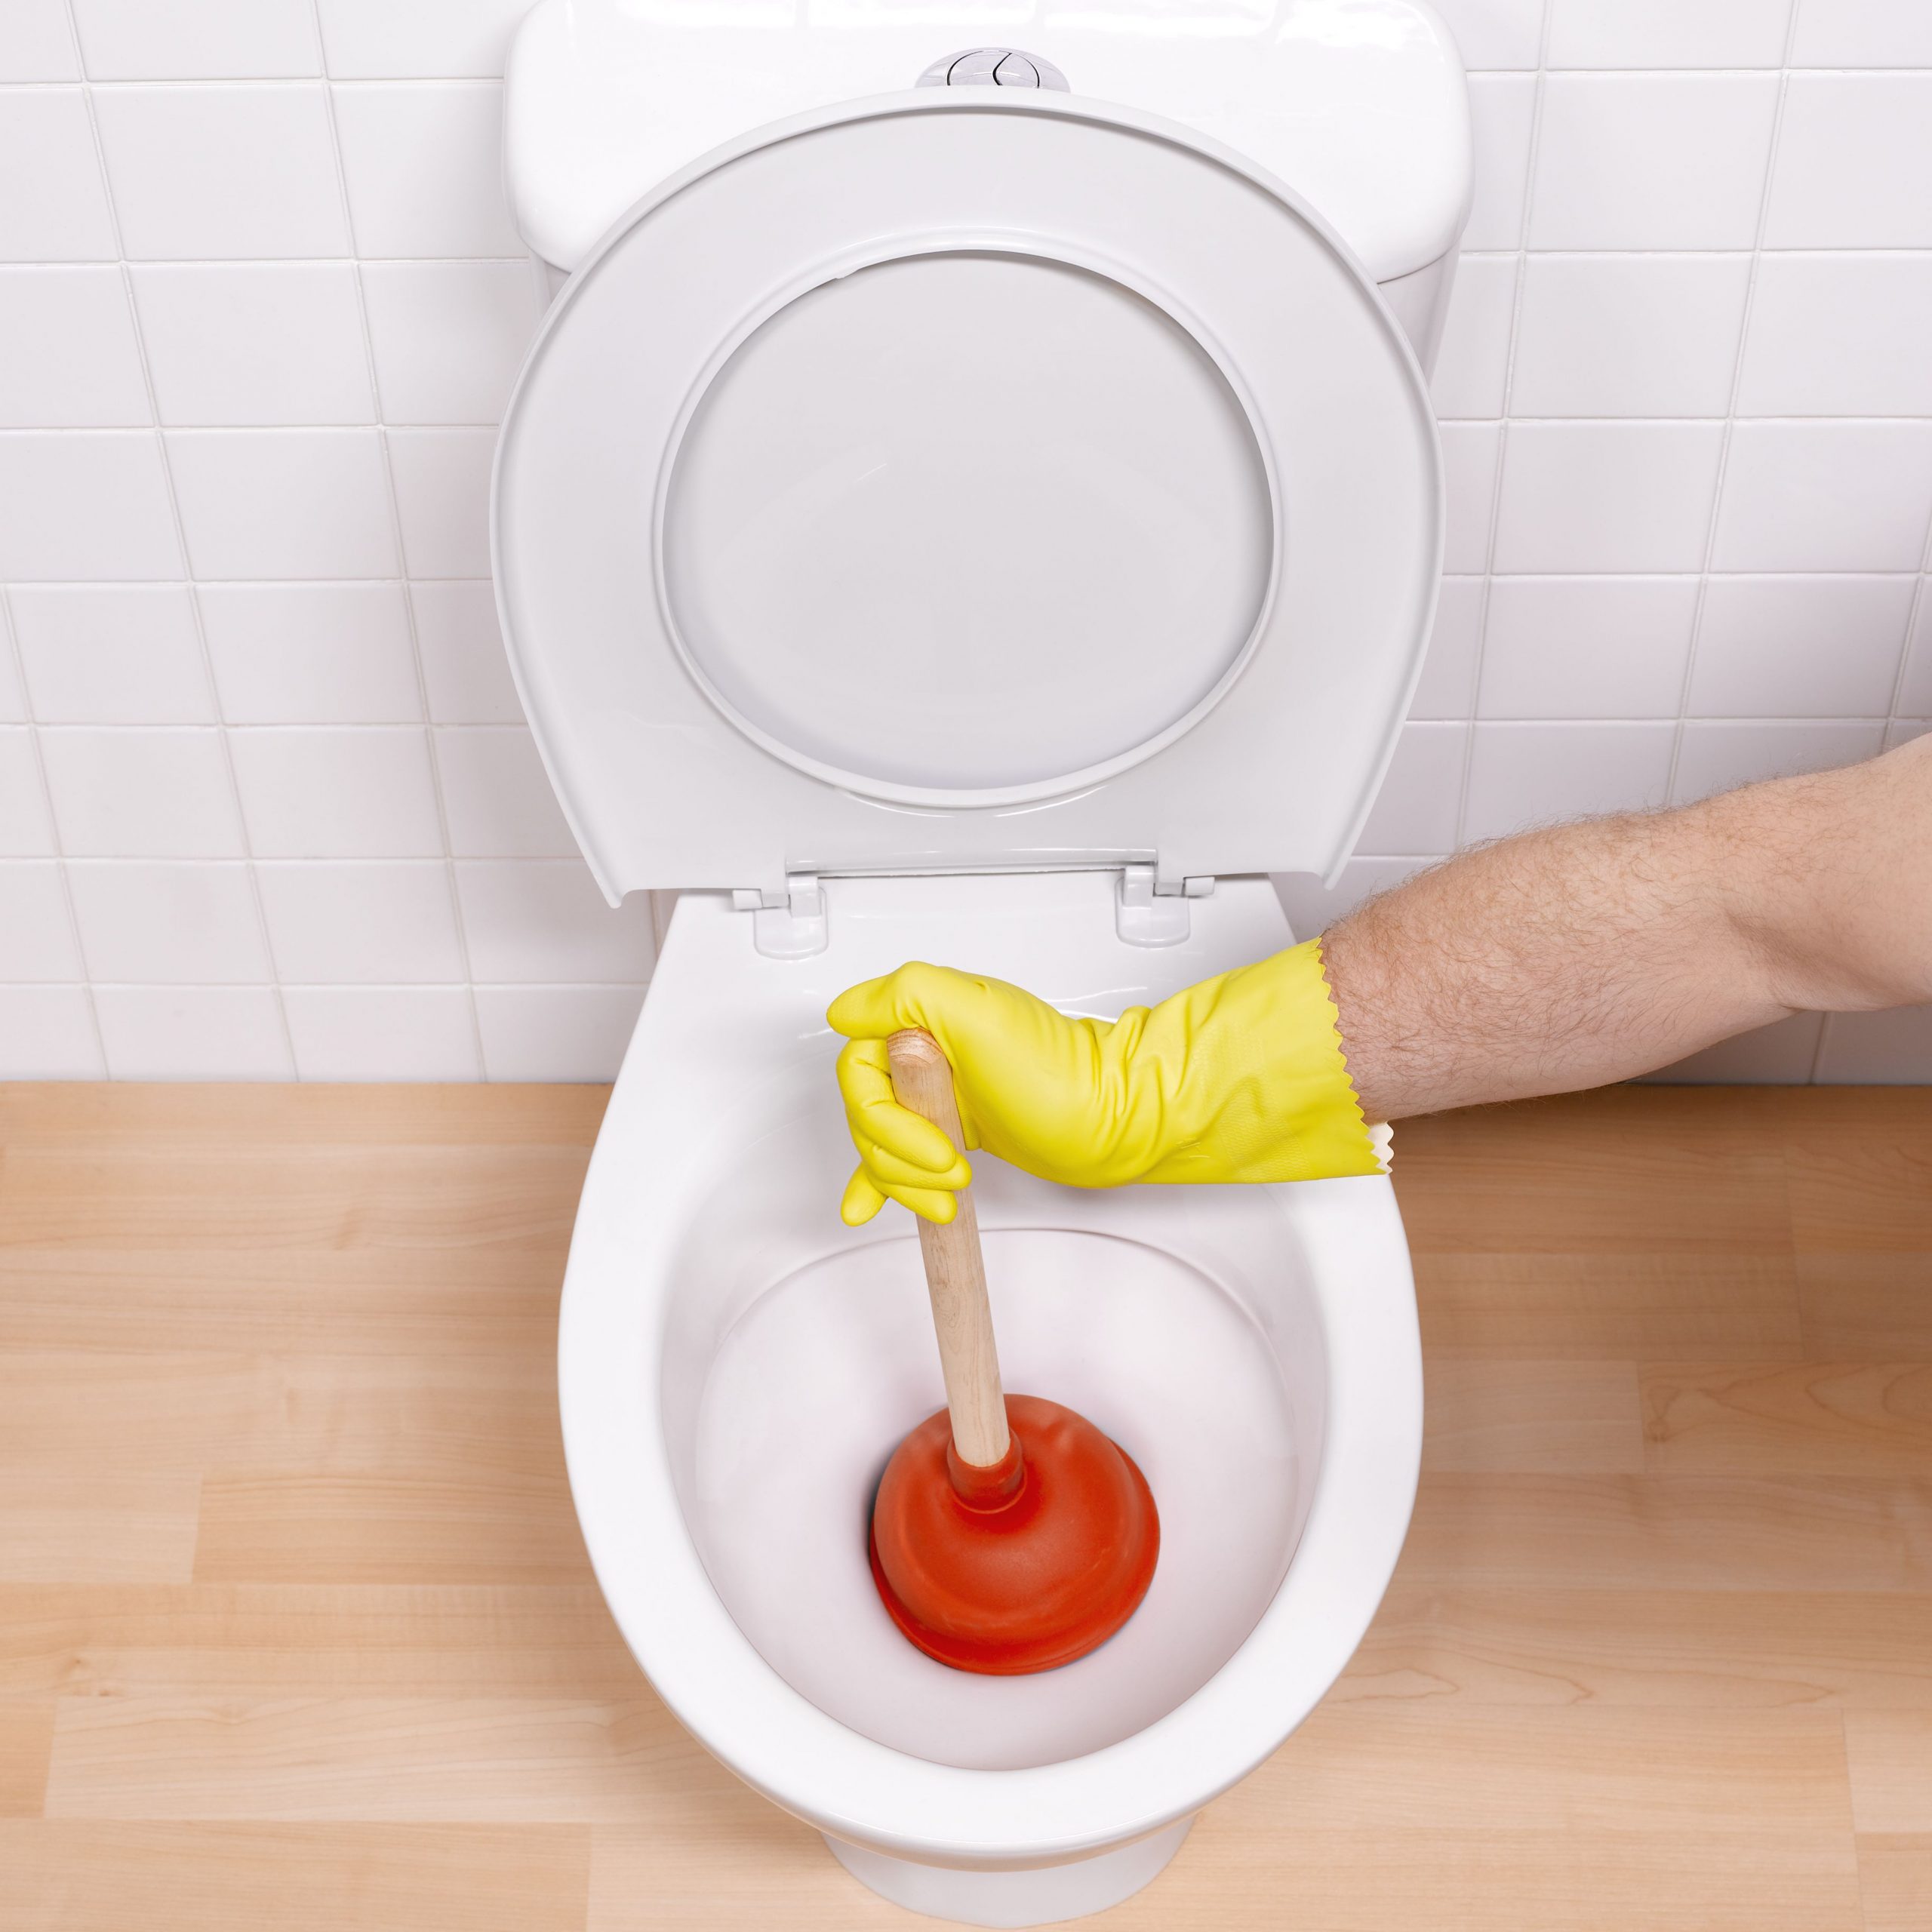 Is It Bad to Leave A Clogged Toilet Overnight? 